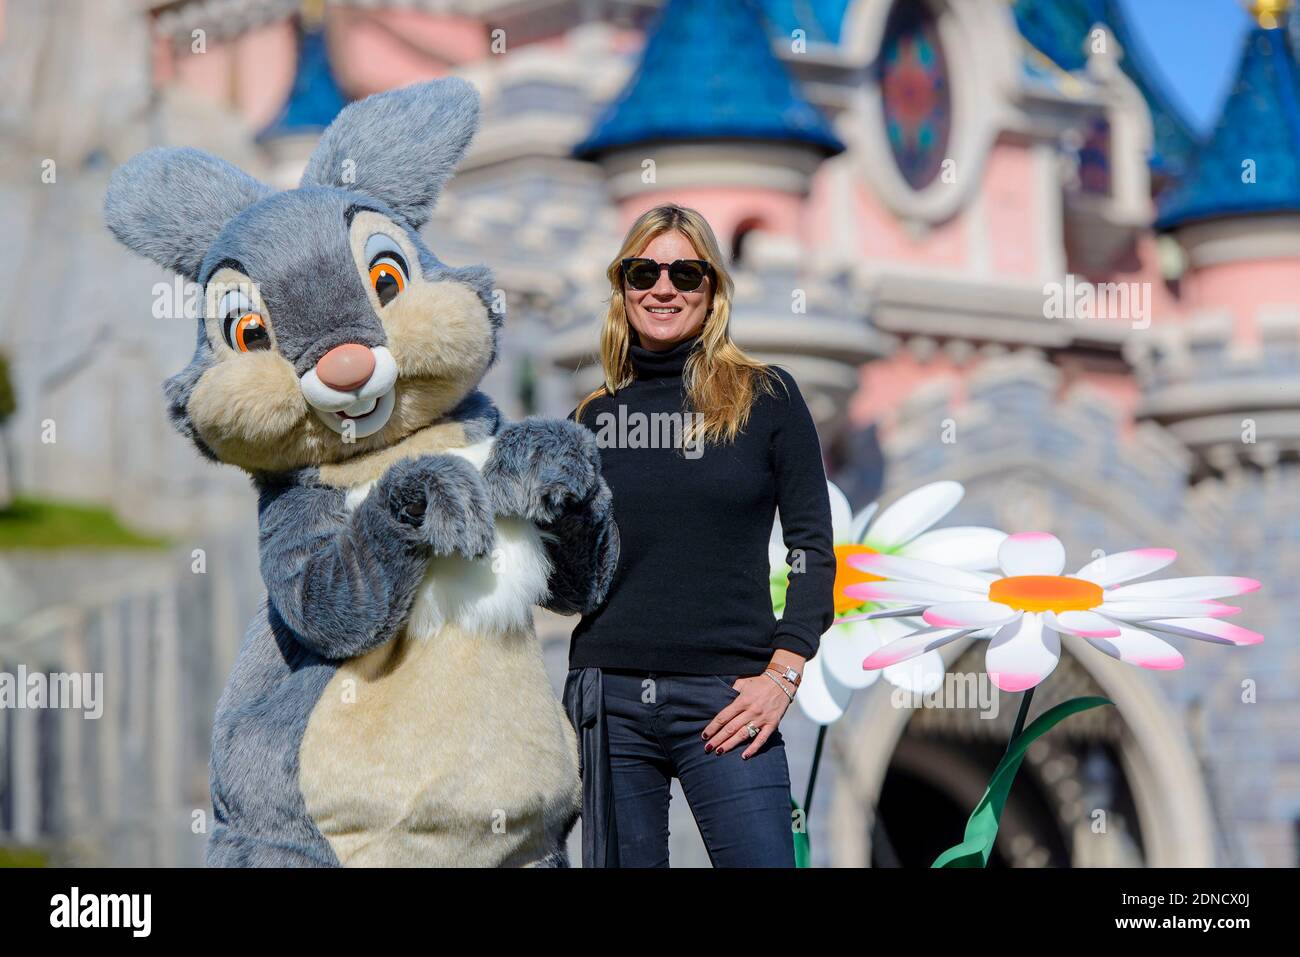 British supermodel Kate Moss poses with 'Pan Pan' aka 'Thumper' during her first ever visit to Disneyland Resort Paris, in Marne-la-Vallee, near Paris, France on March 8, 2015. Kate was accompanied by daughter Lila Grace and husband Jamie Hince. Photo by Disneyland Paris/ABACAPRESS.COM Stock Photo